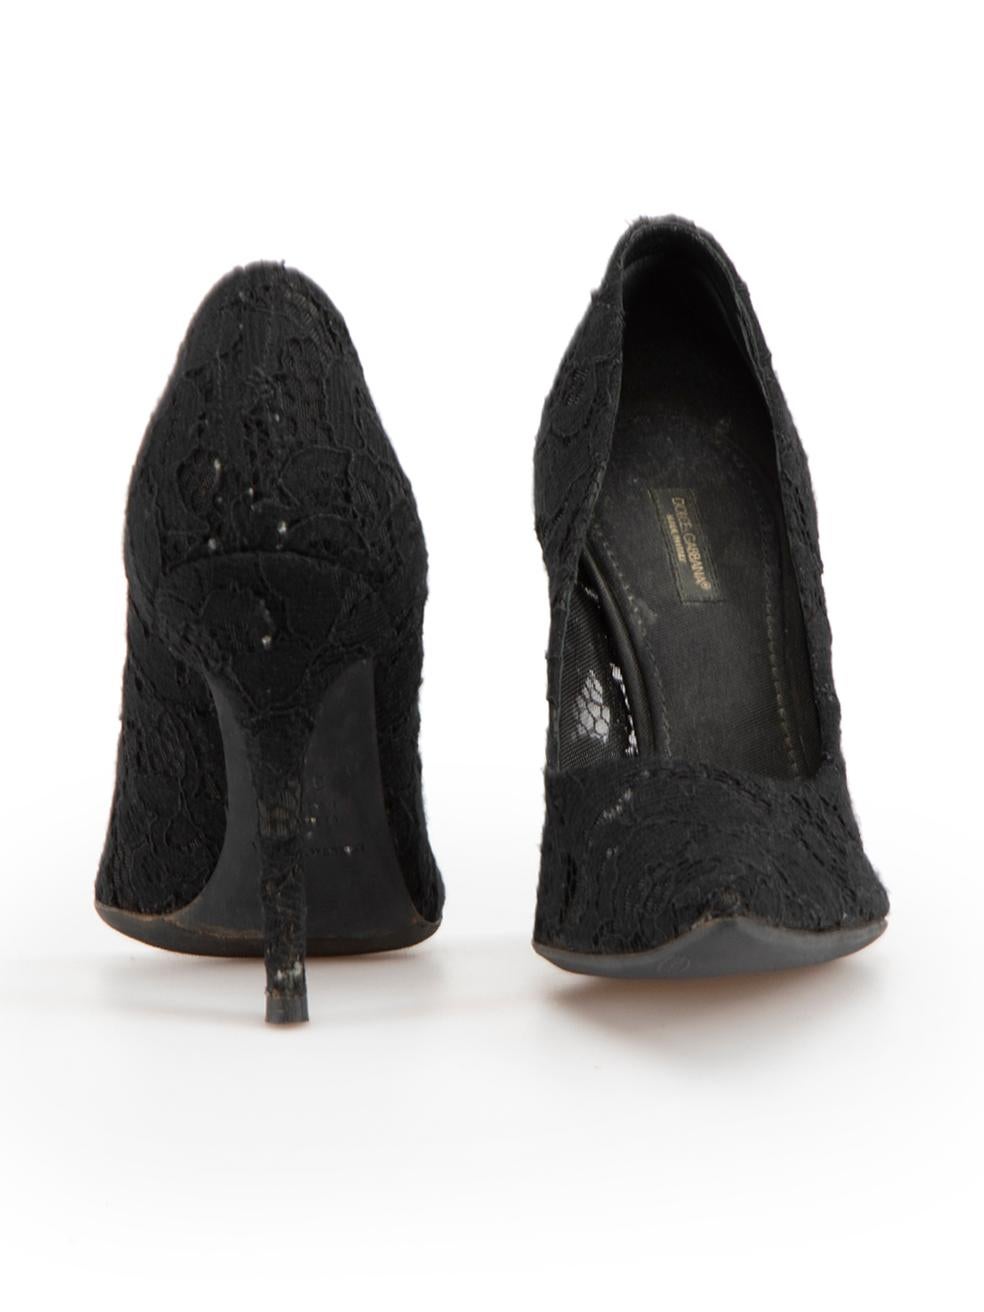 Dolce & Gabbana Black Lace Court Pumps Size IT 38.5 In Excellent Condition For Sale In London, GB